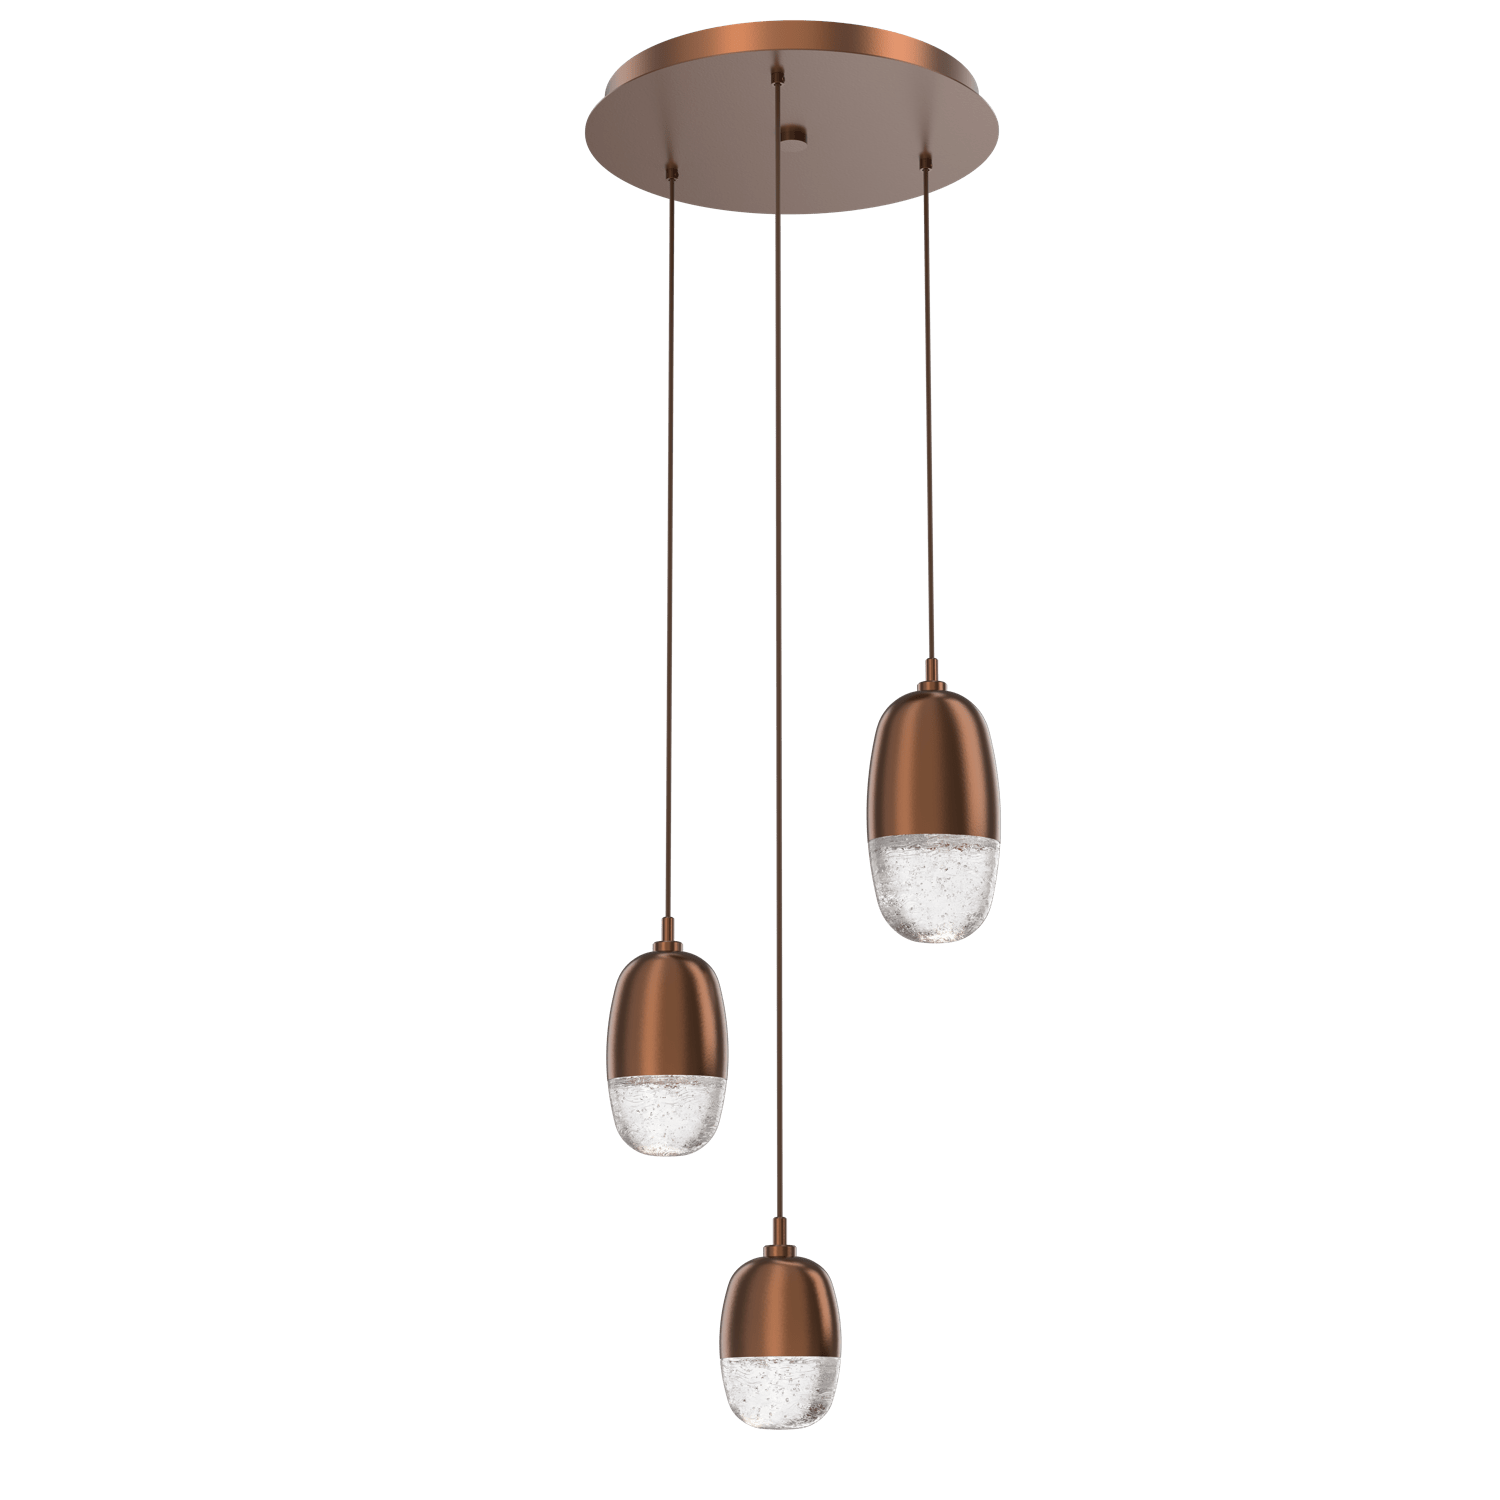 CHB0079-03-BB-Hammerton-Studio-Pebble-3-light-round-pendant-chandelier-with-burnished-bronze-finish-and-clear-cast-glass-shades-and-LED-lamping